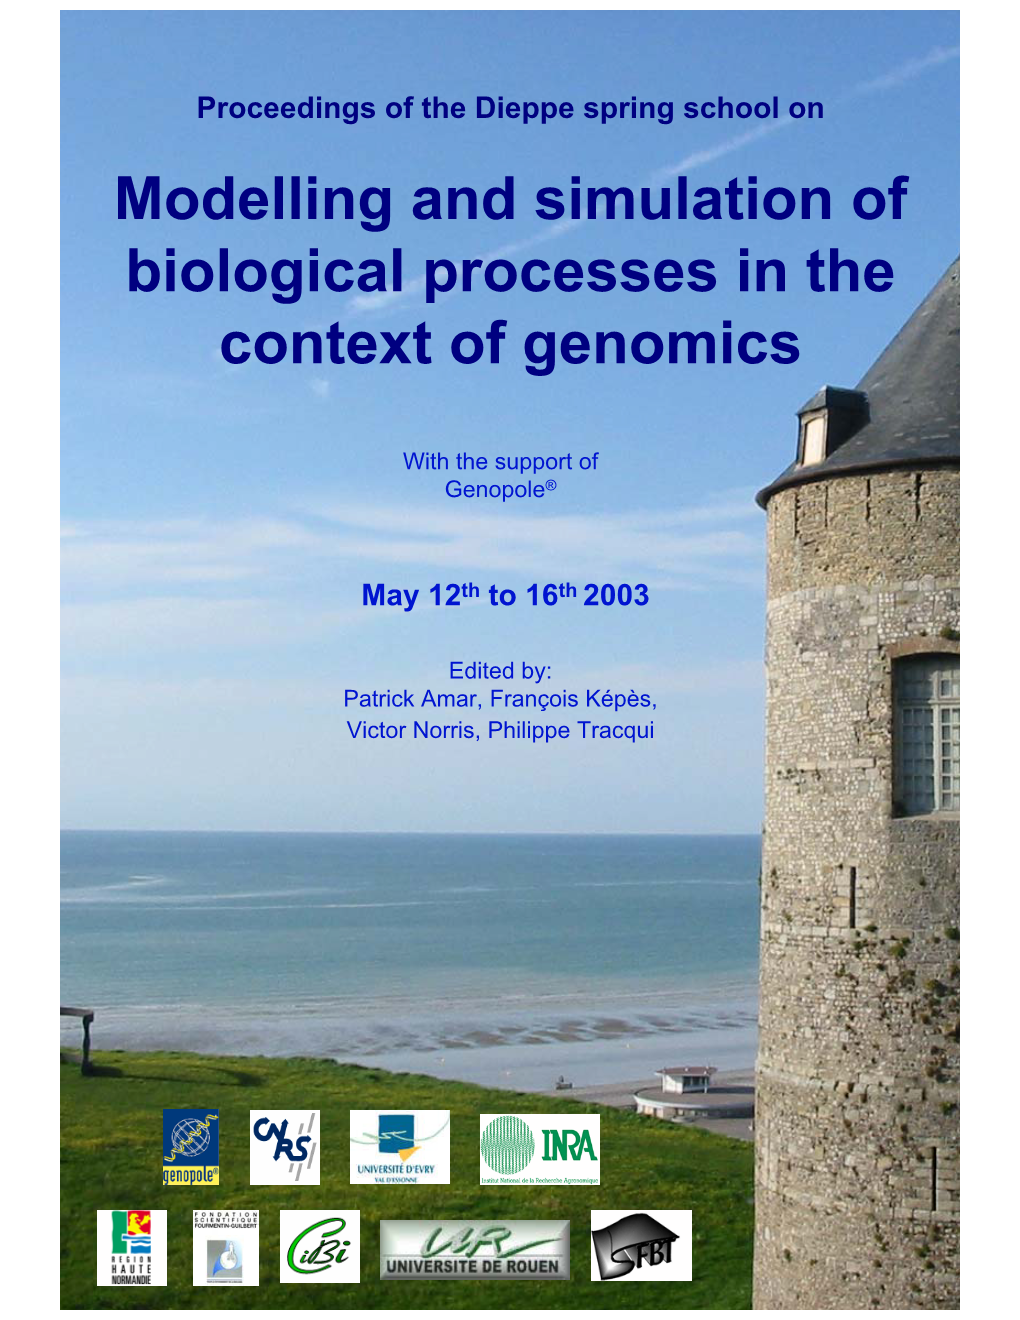 Proceedings of the Dieppe Spring School on Modelling and Simulation of Biological Processes in the Context of Genomics